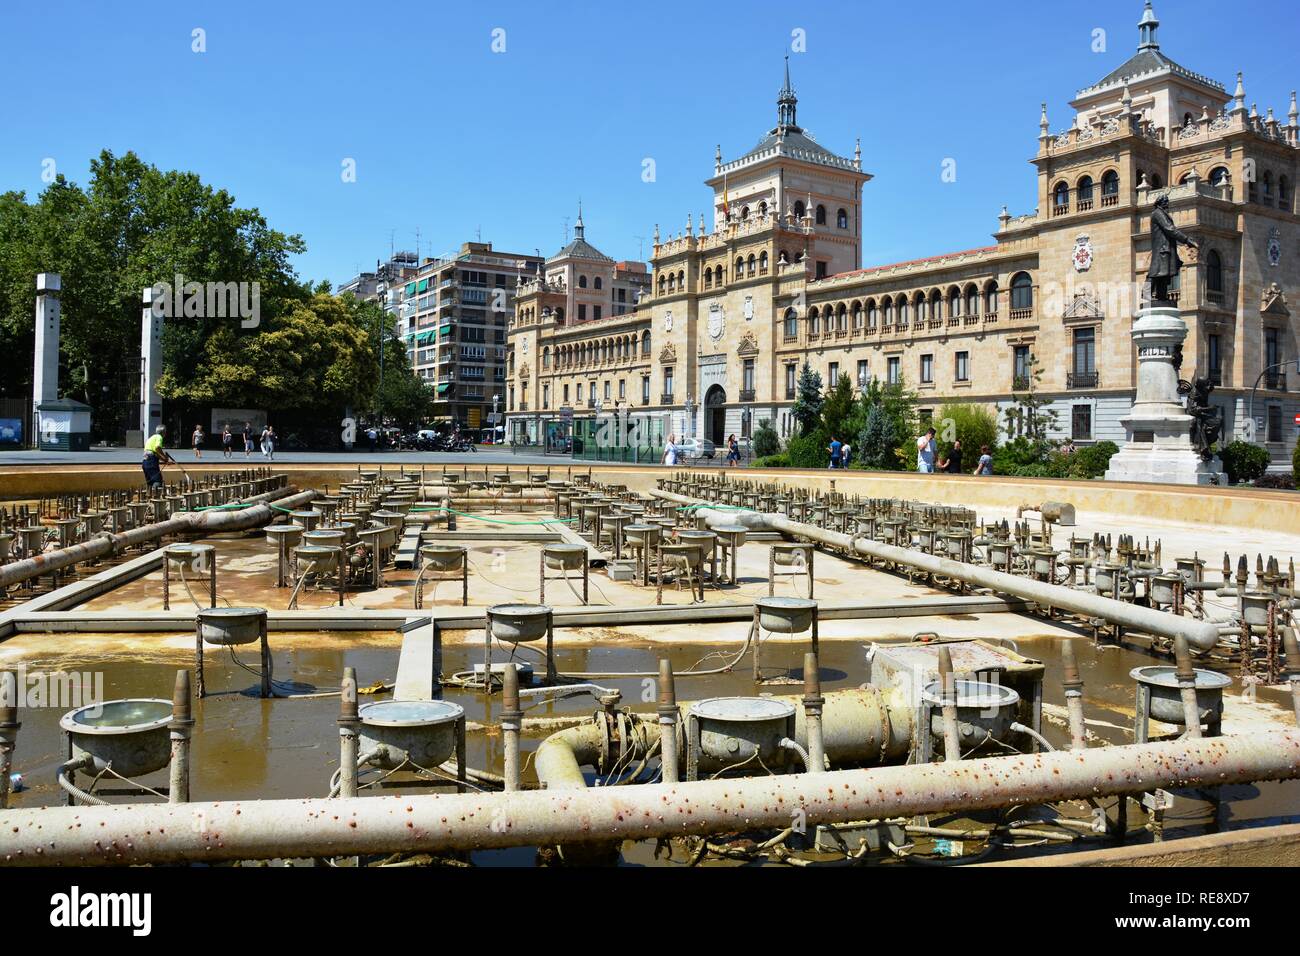 a dry fountain full of pipes and spotlights Stock Photo